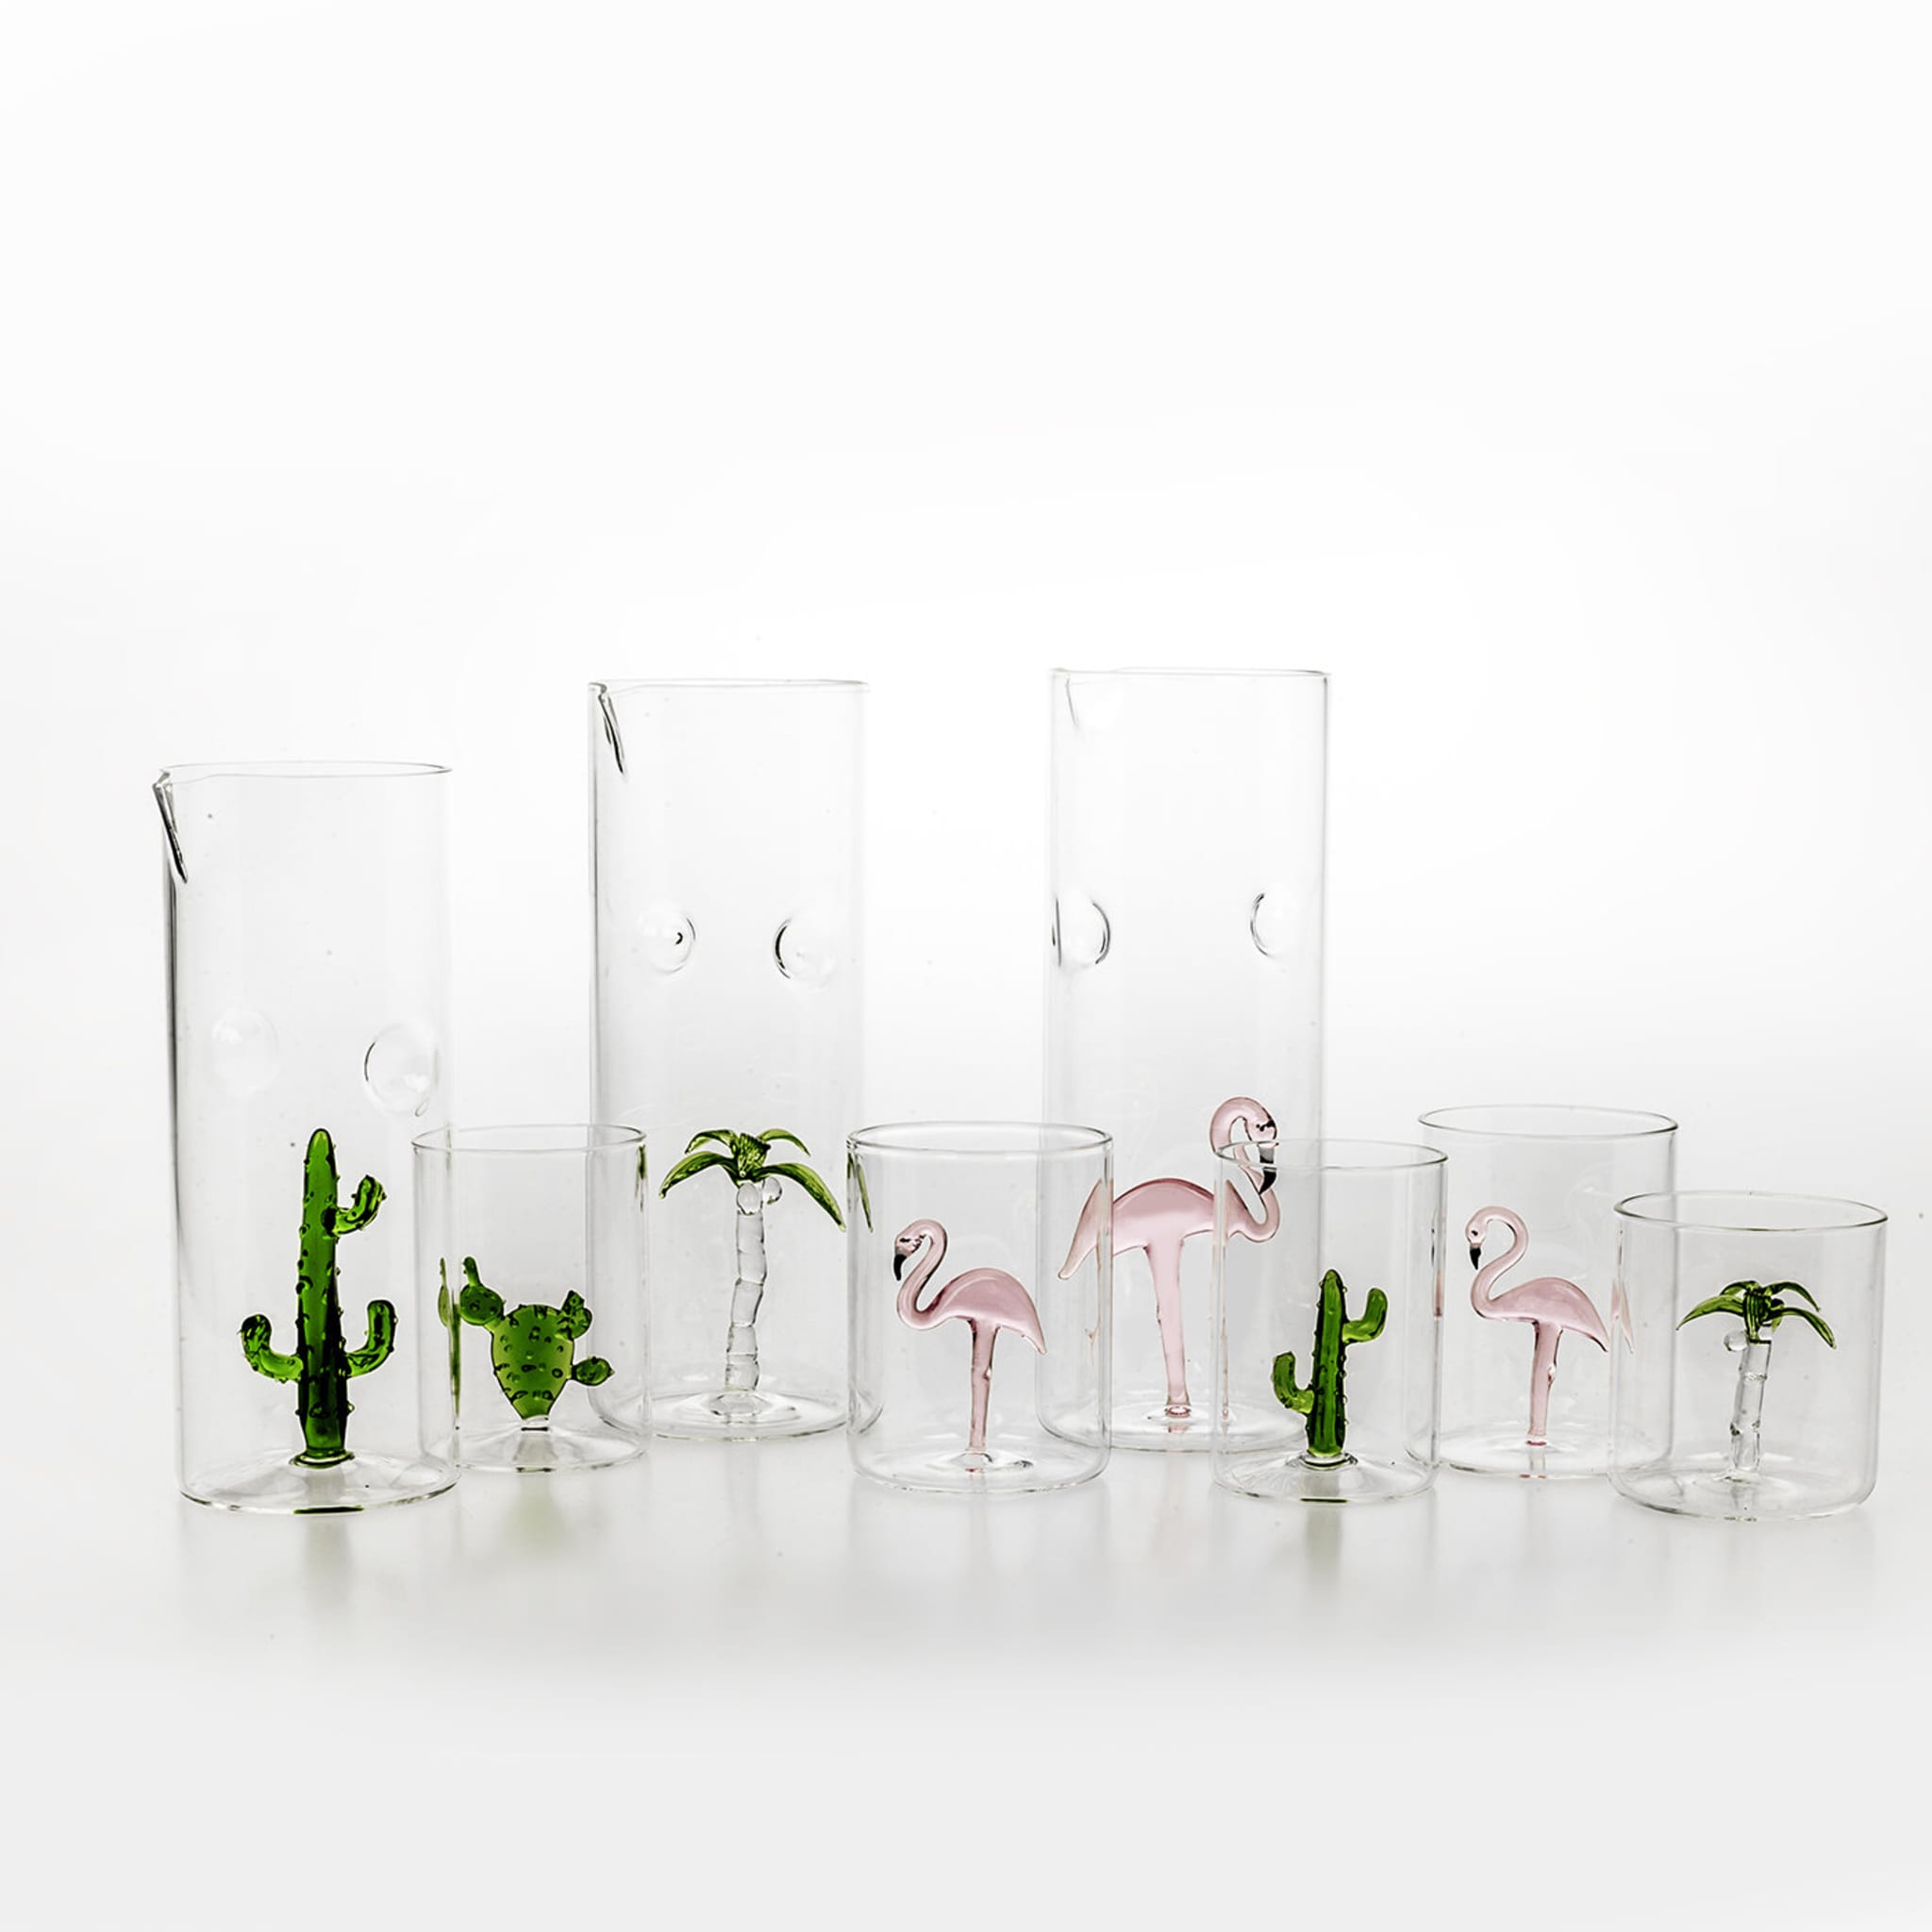 Palma Set of 4 Glasses and Pitcher - Alternative view 1